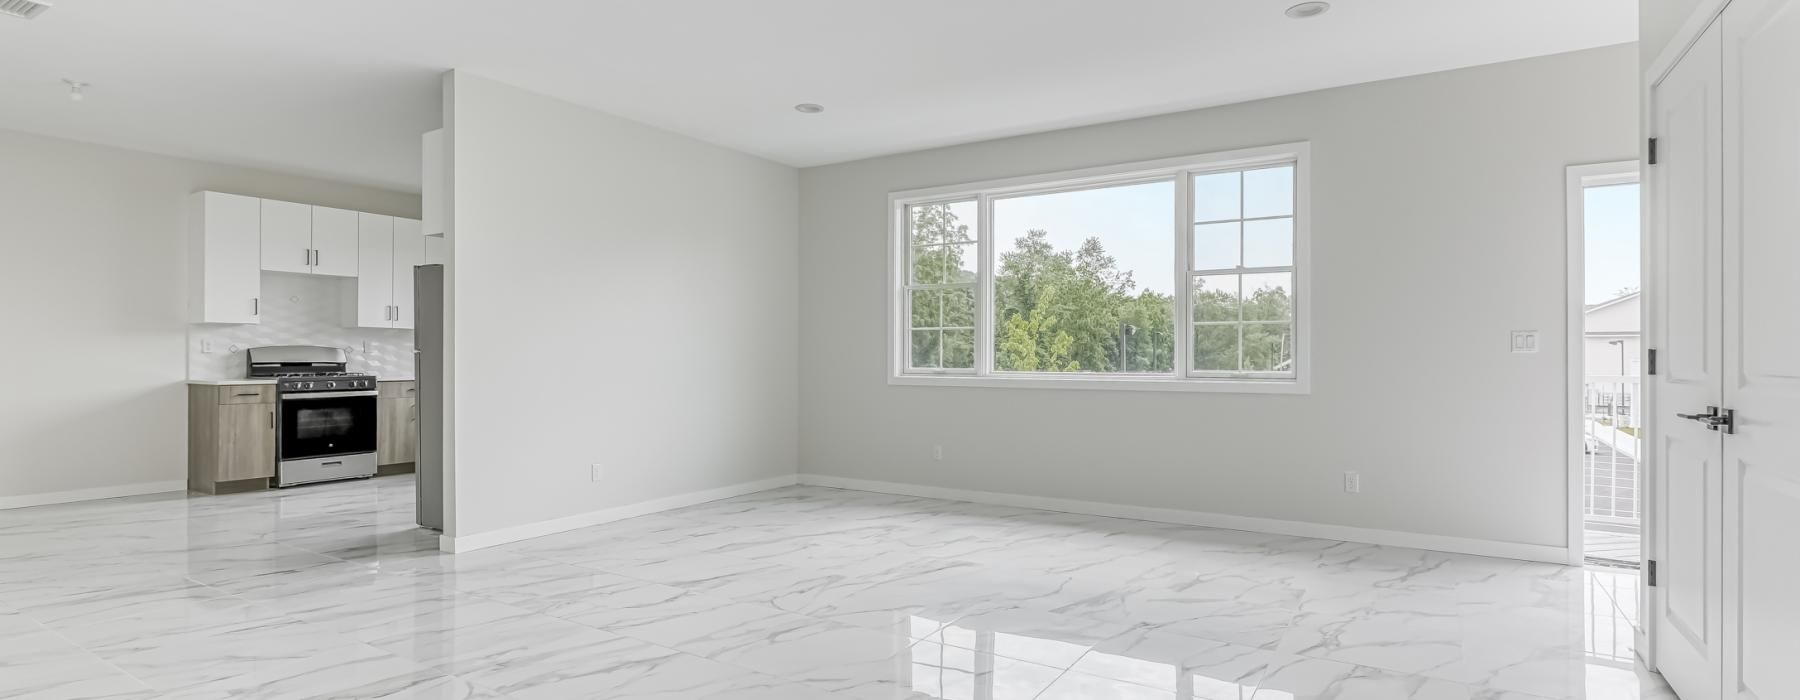 a large empty living room